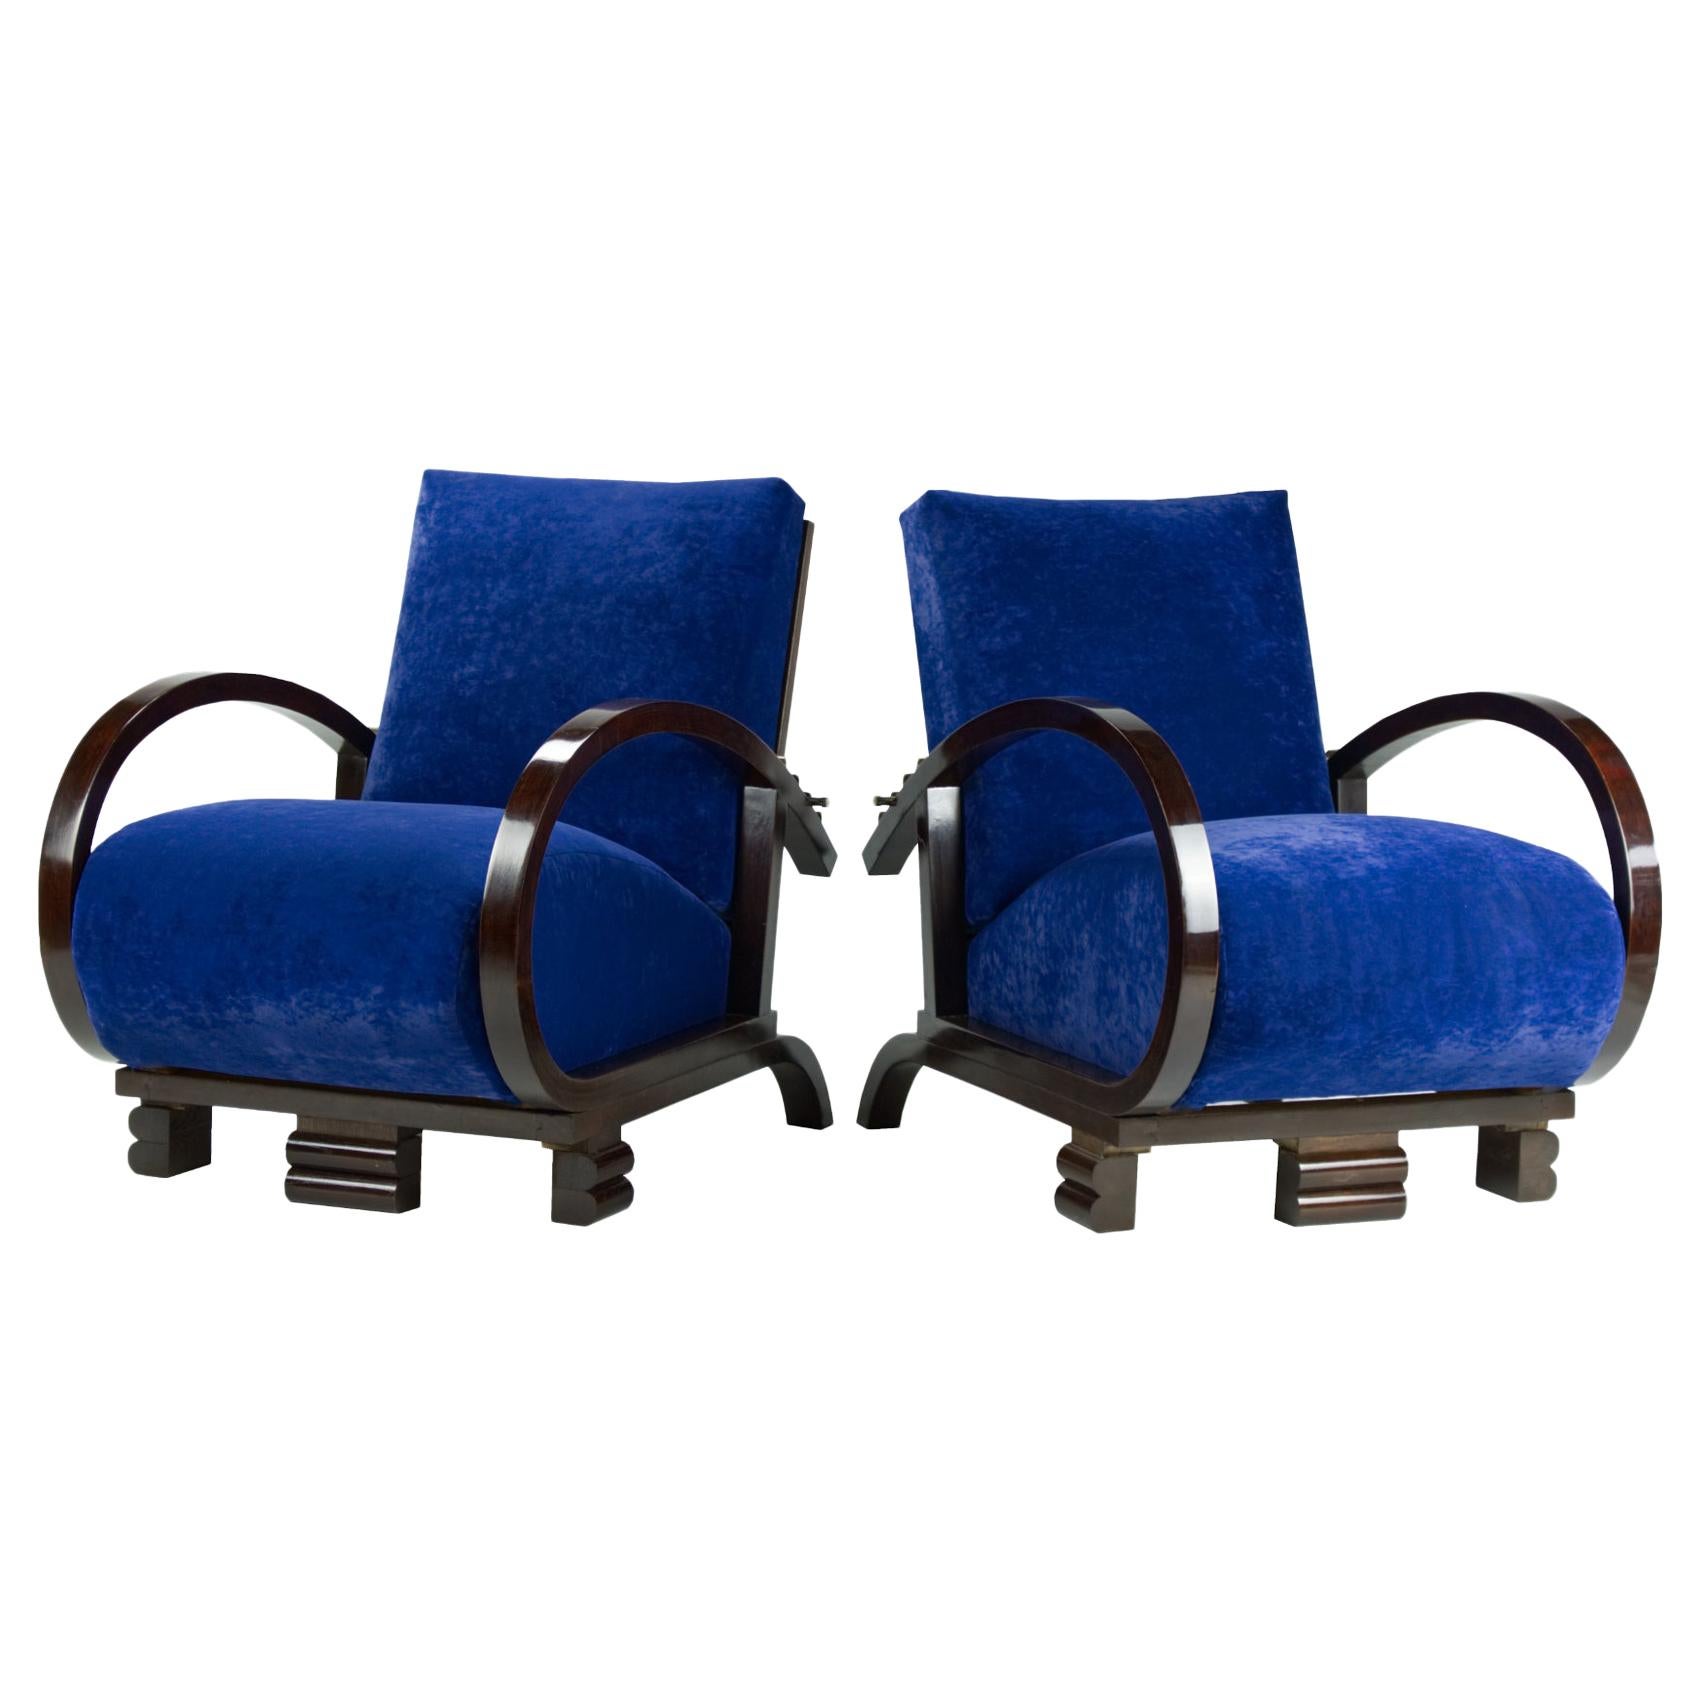 Restored Blue Art Deco Lounge Chairs, 1930s